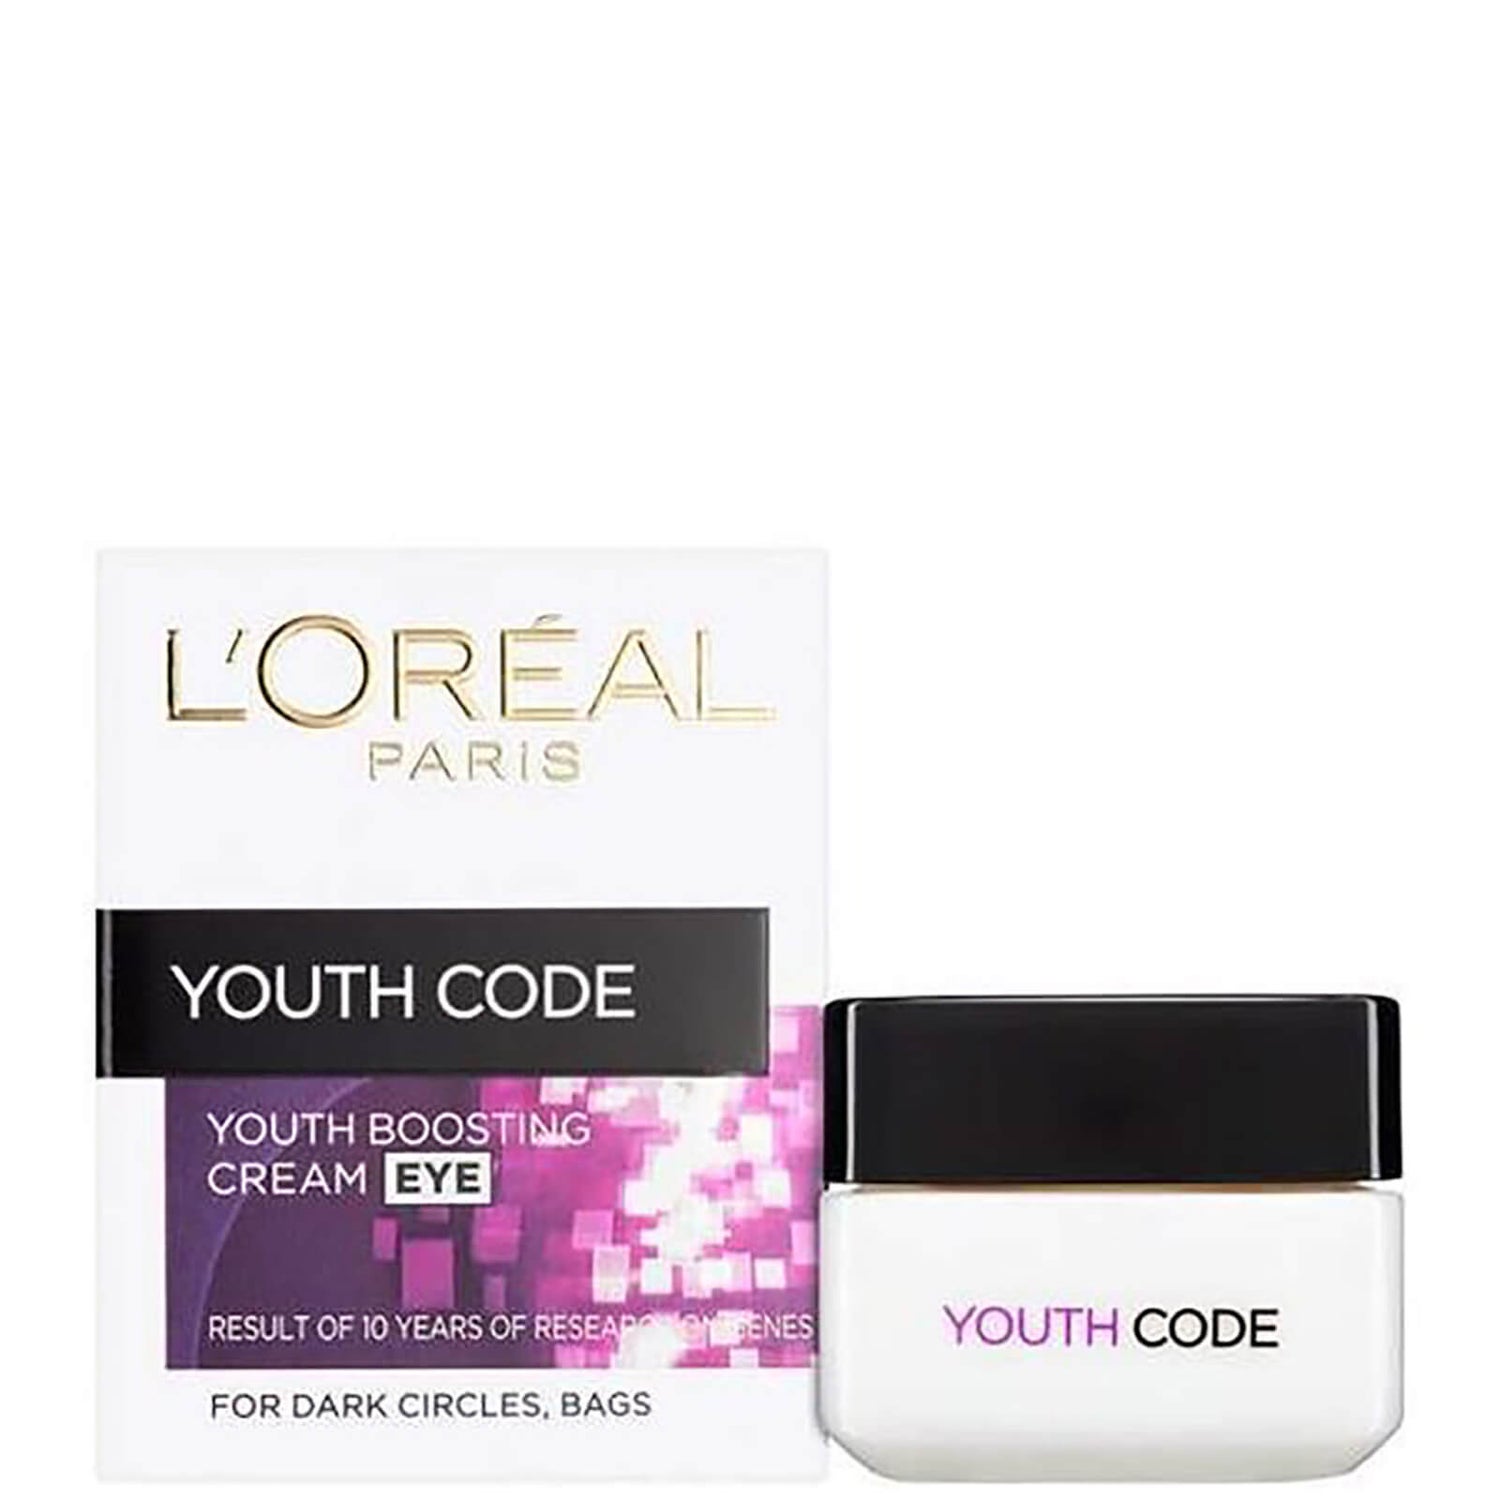 L'Oréal Paris Dermo Expertise Youth Code Youth Boosting Eye Cream (15ml)